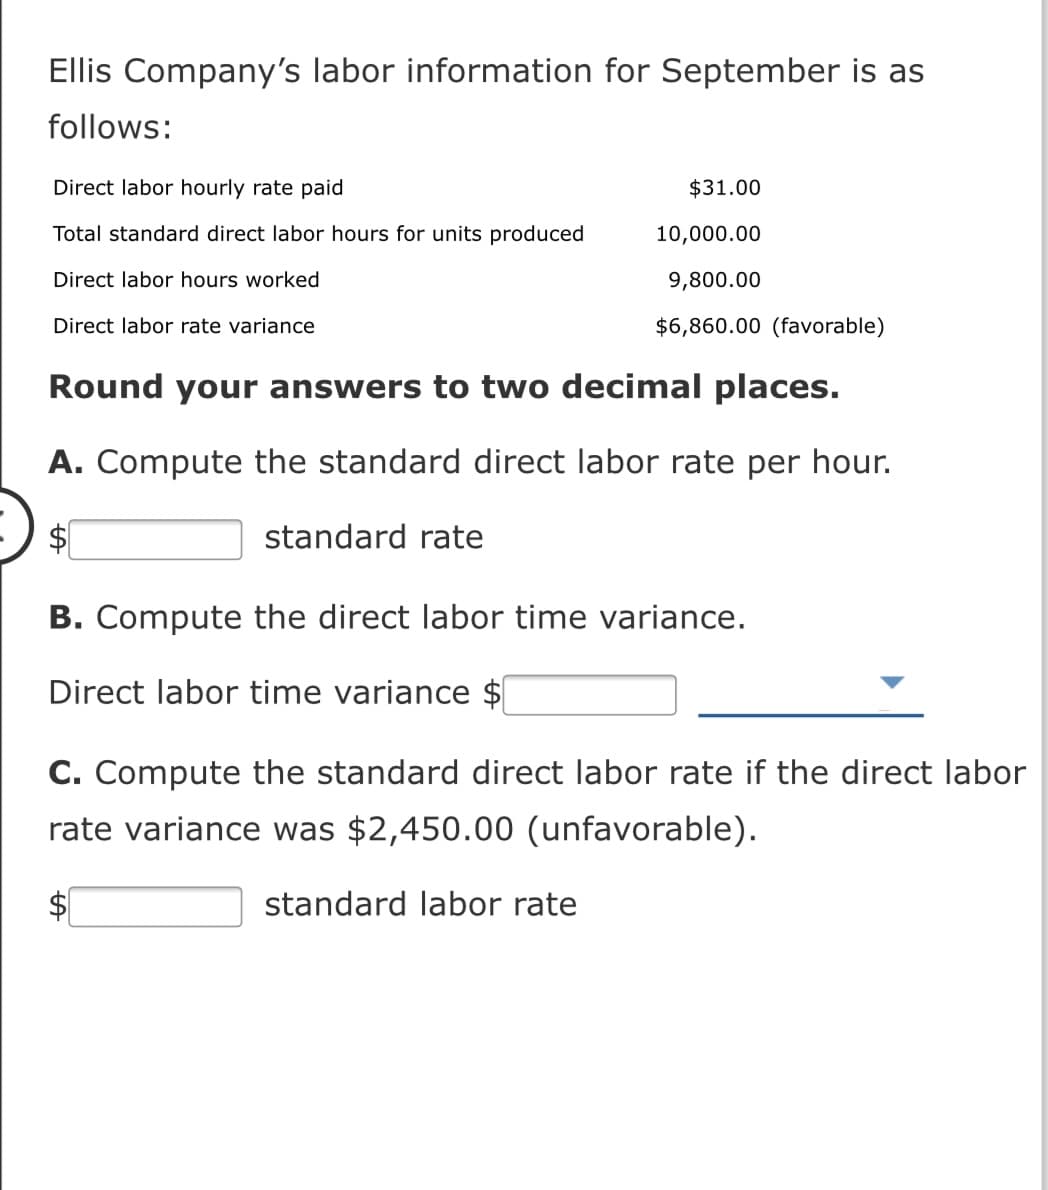 Ellis Company's labor information for September is as
follows:
Direct labor hourly rate paid
$31.00
Total standard direct labor hours for units produced
10,000.00
Direct labor hours worked
9,800.00
Direct labor rate variance
$6,860.00 (favorable)
Round your answers to two decimal places.
A. Compute the standard direct labor rat
per hour.
standard rate
B. Compute the direct labor time variance.
Direct labor time variance $
C. Compute the standard direct labor rate if the direct labor
rate variance was $2,450.00 (unfavorable).
standard labor rate
